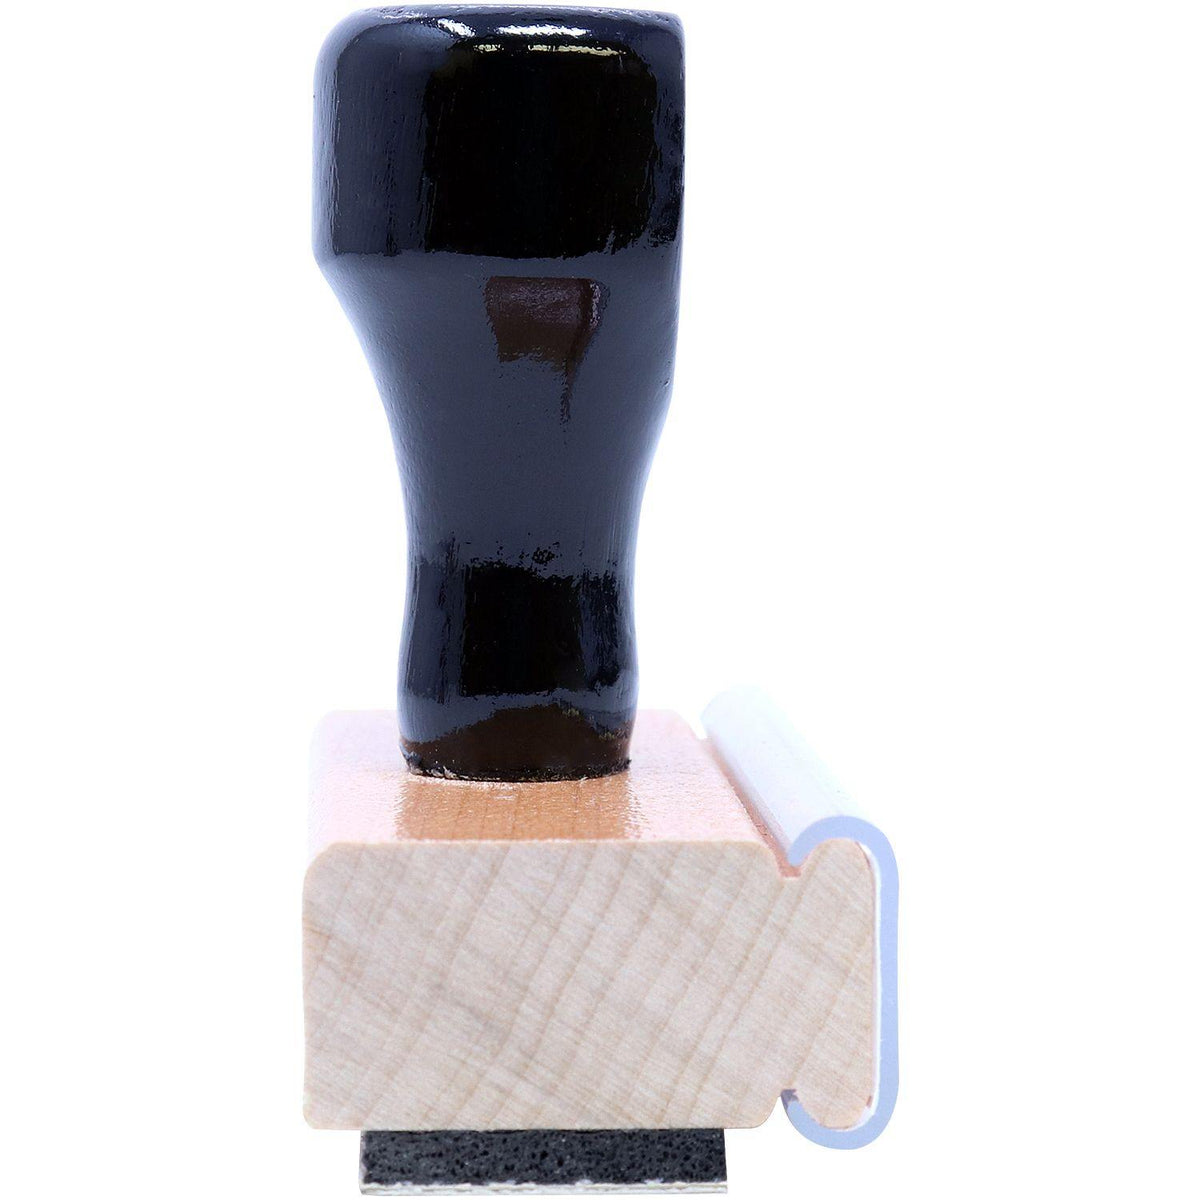 Side View of Large No Such Number Rubber Stamp